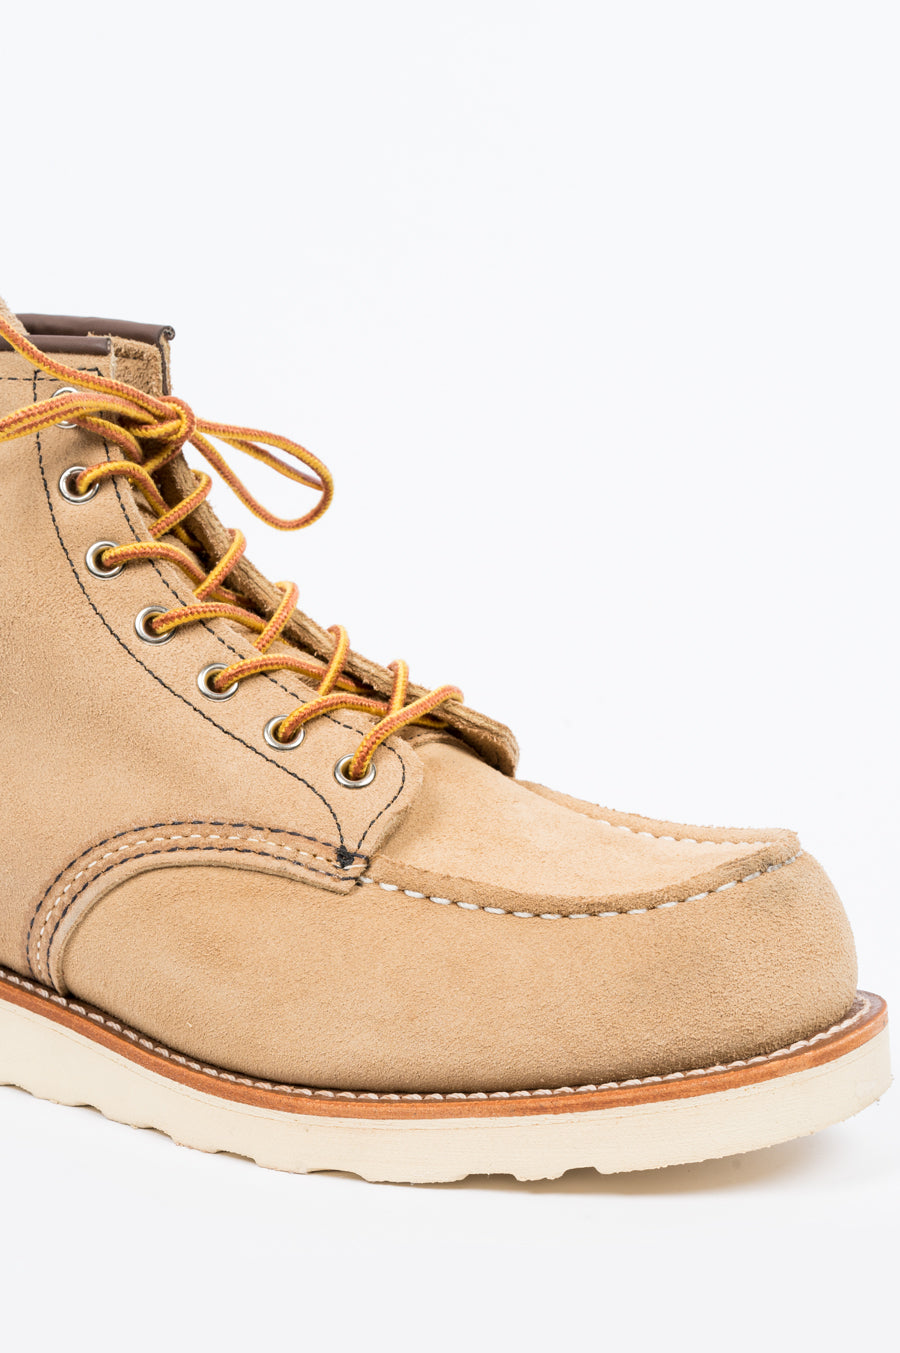 RED WING 6 BOOT CLASSIC MOC SAND